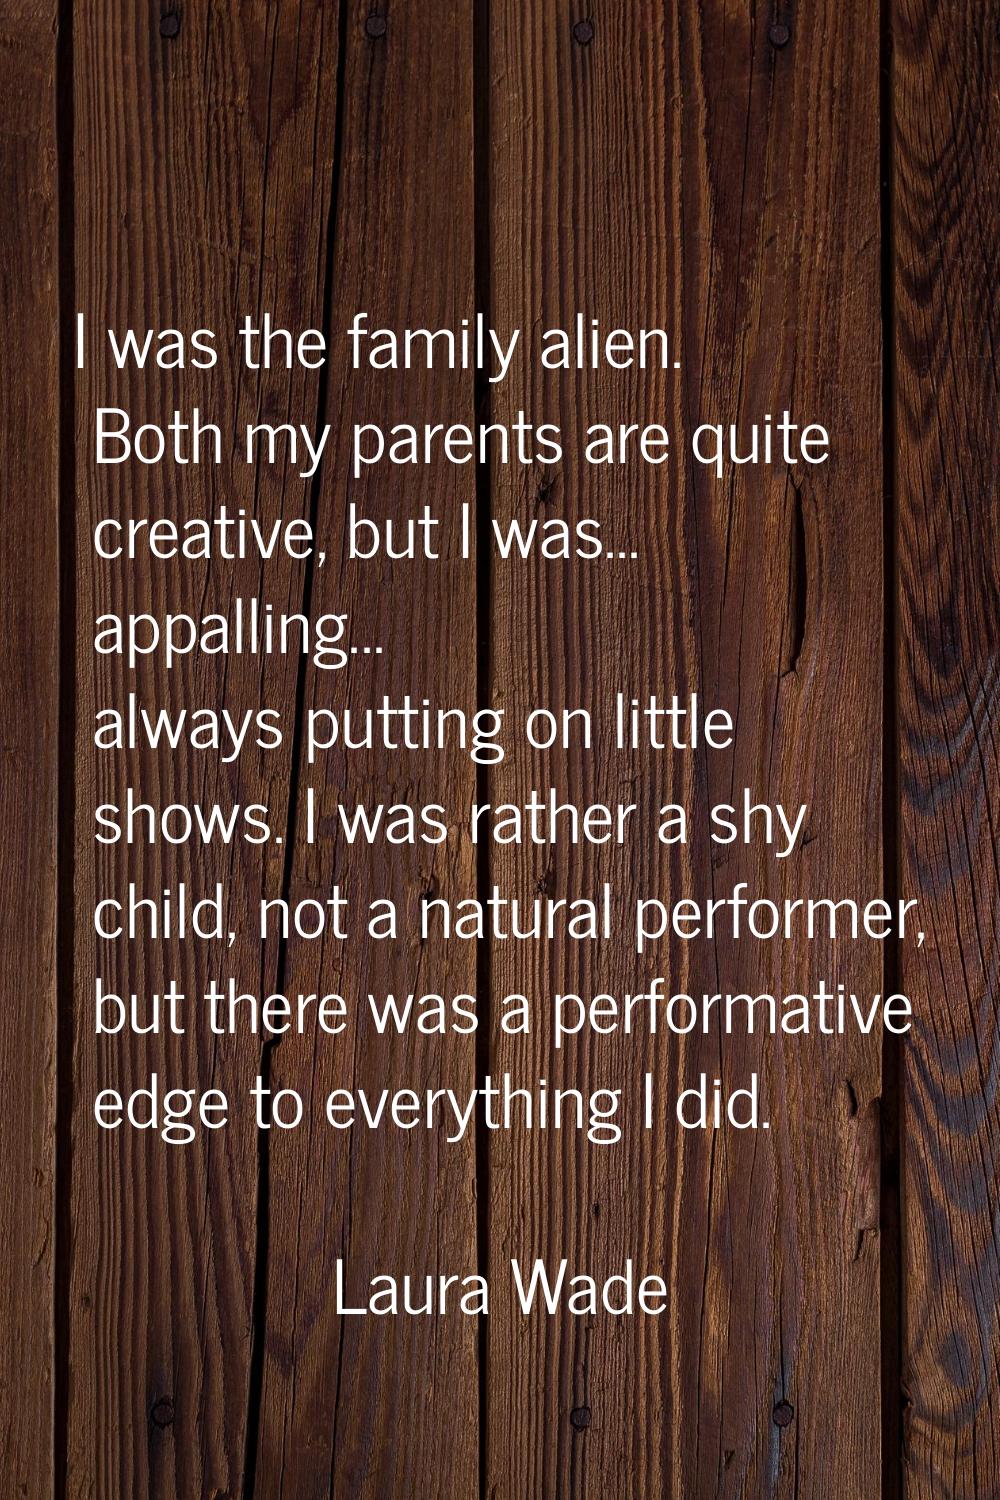 I was the family alien. Both my parents are quite creative, but I was... appalling... always puttin